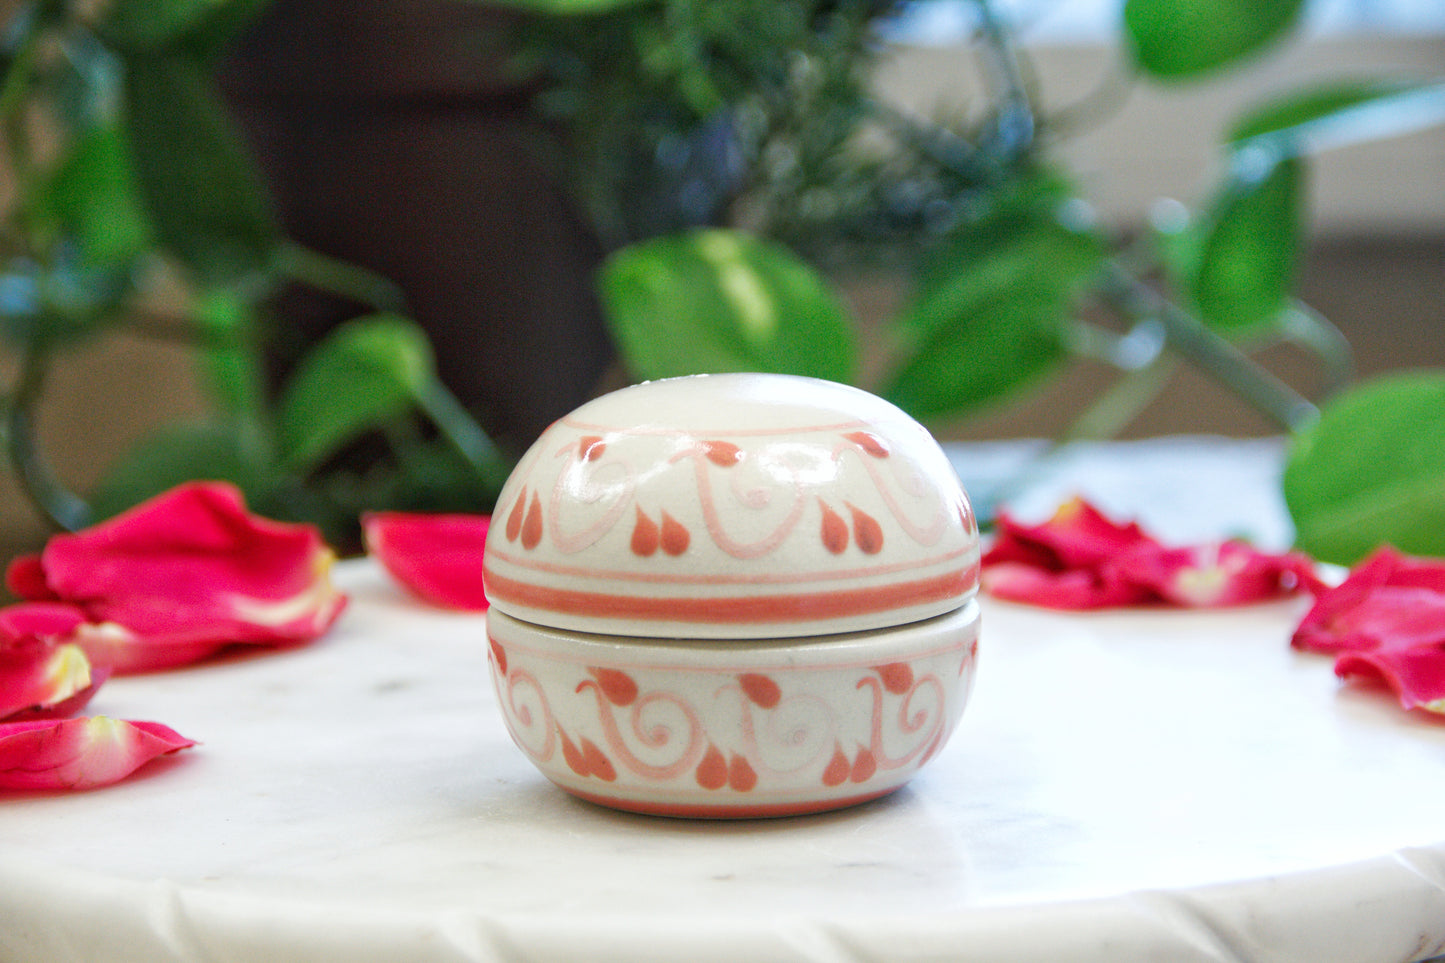 Artisanal candle in a beautiful biege and light pink talavera cup with a closed lid. Handmade spiral design. Handcrafted by Artisan in Mexico City. 100% All Natural Soy Candle. Reuse the talavera as home decor or storage.